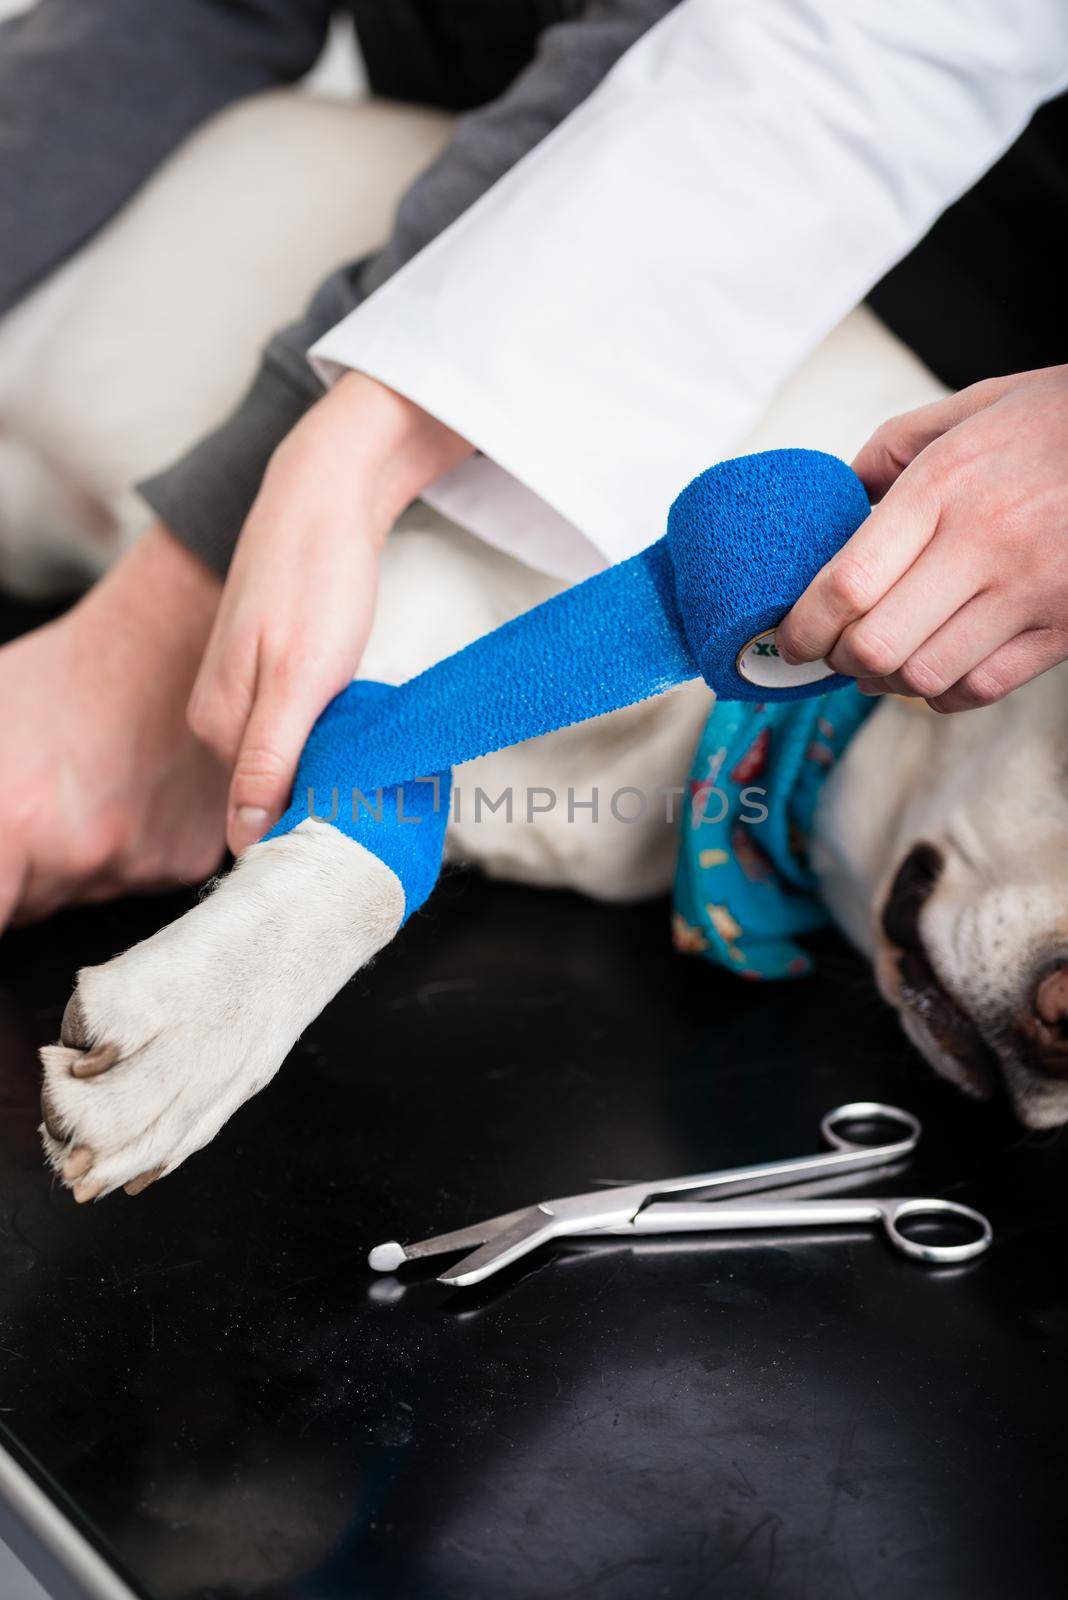 Dog getting bandage after injury on his leg by a veterinarian